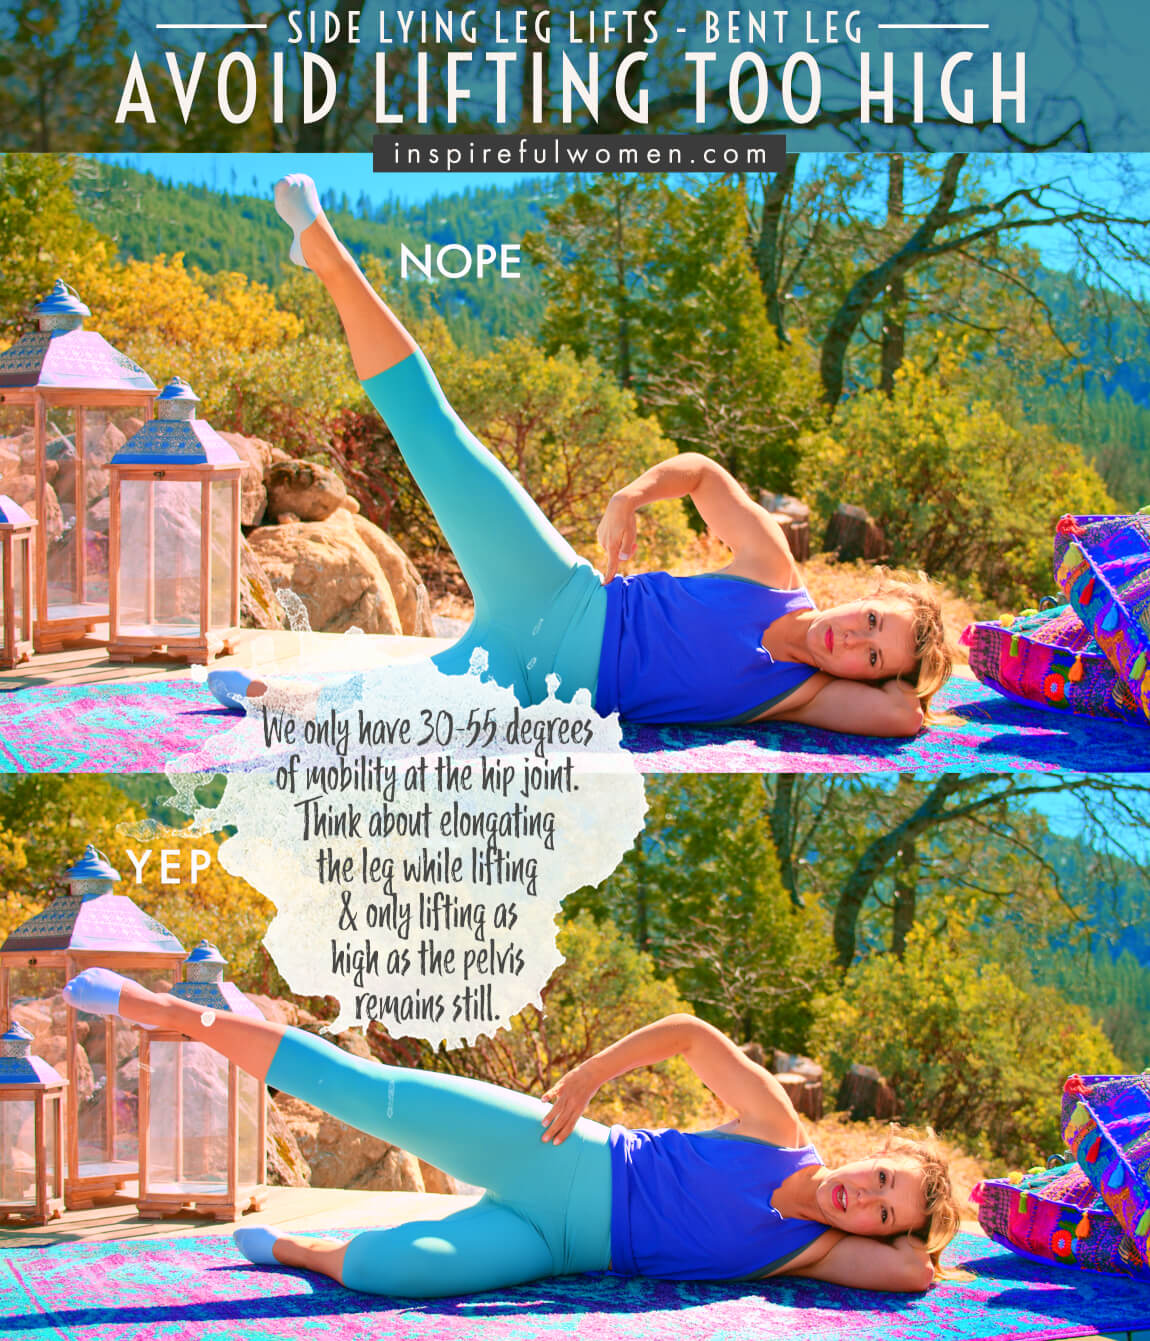 avoid-lifting-too-high-lying-leg-lifts-bent-leg-glute-exercise-common-mistakes